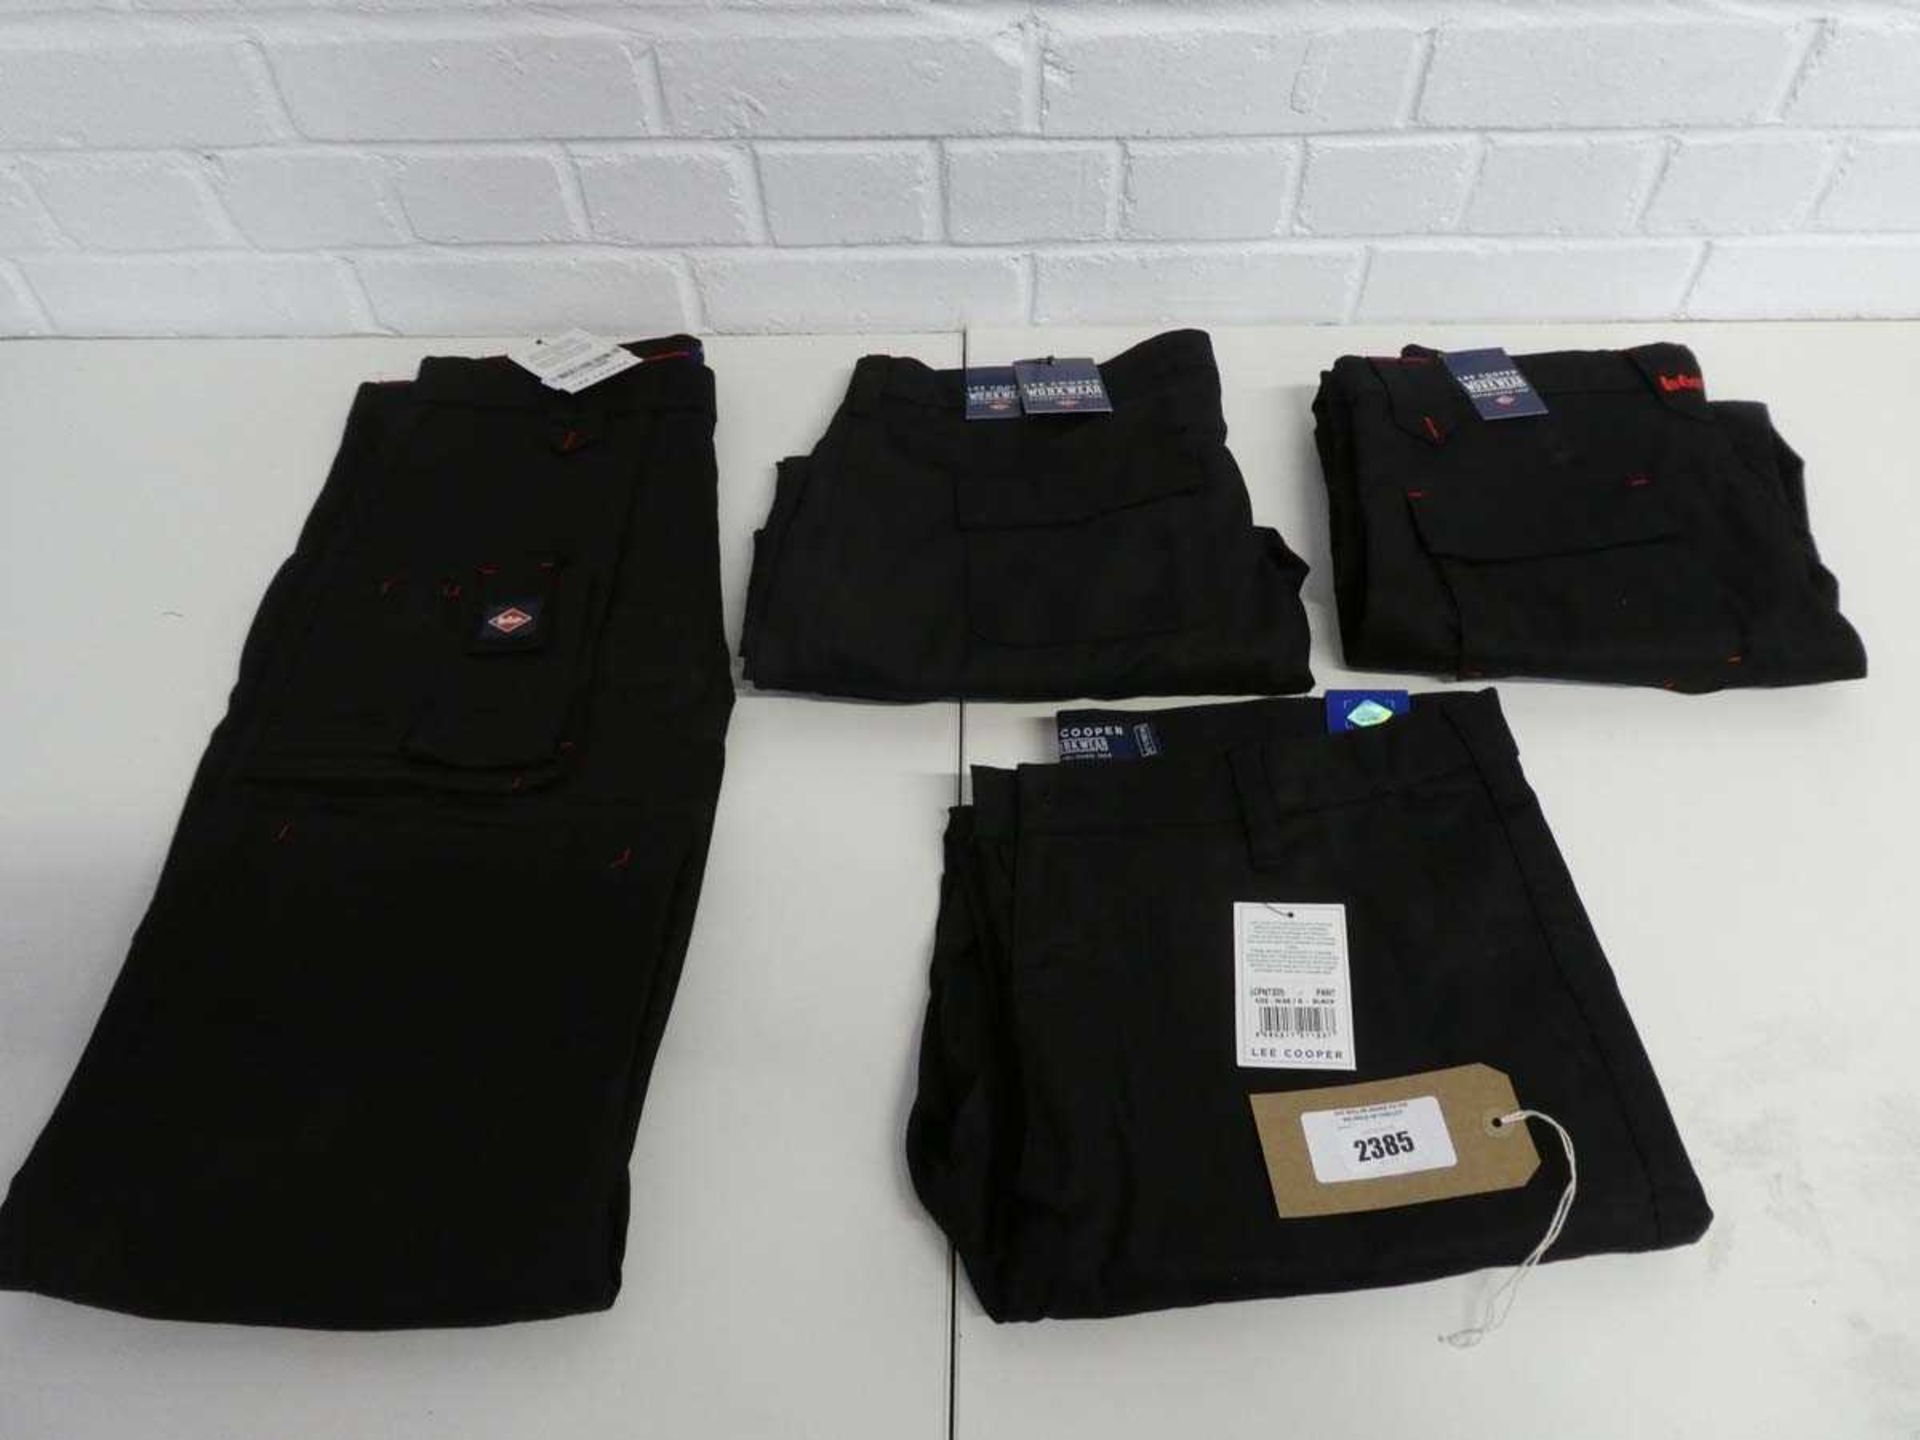 +VAT 4 pairs of Lee Cooper work trousers, sizes 34 by 31, 38 by 31, 34 by 29, UK 16